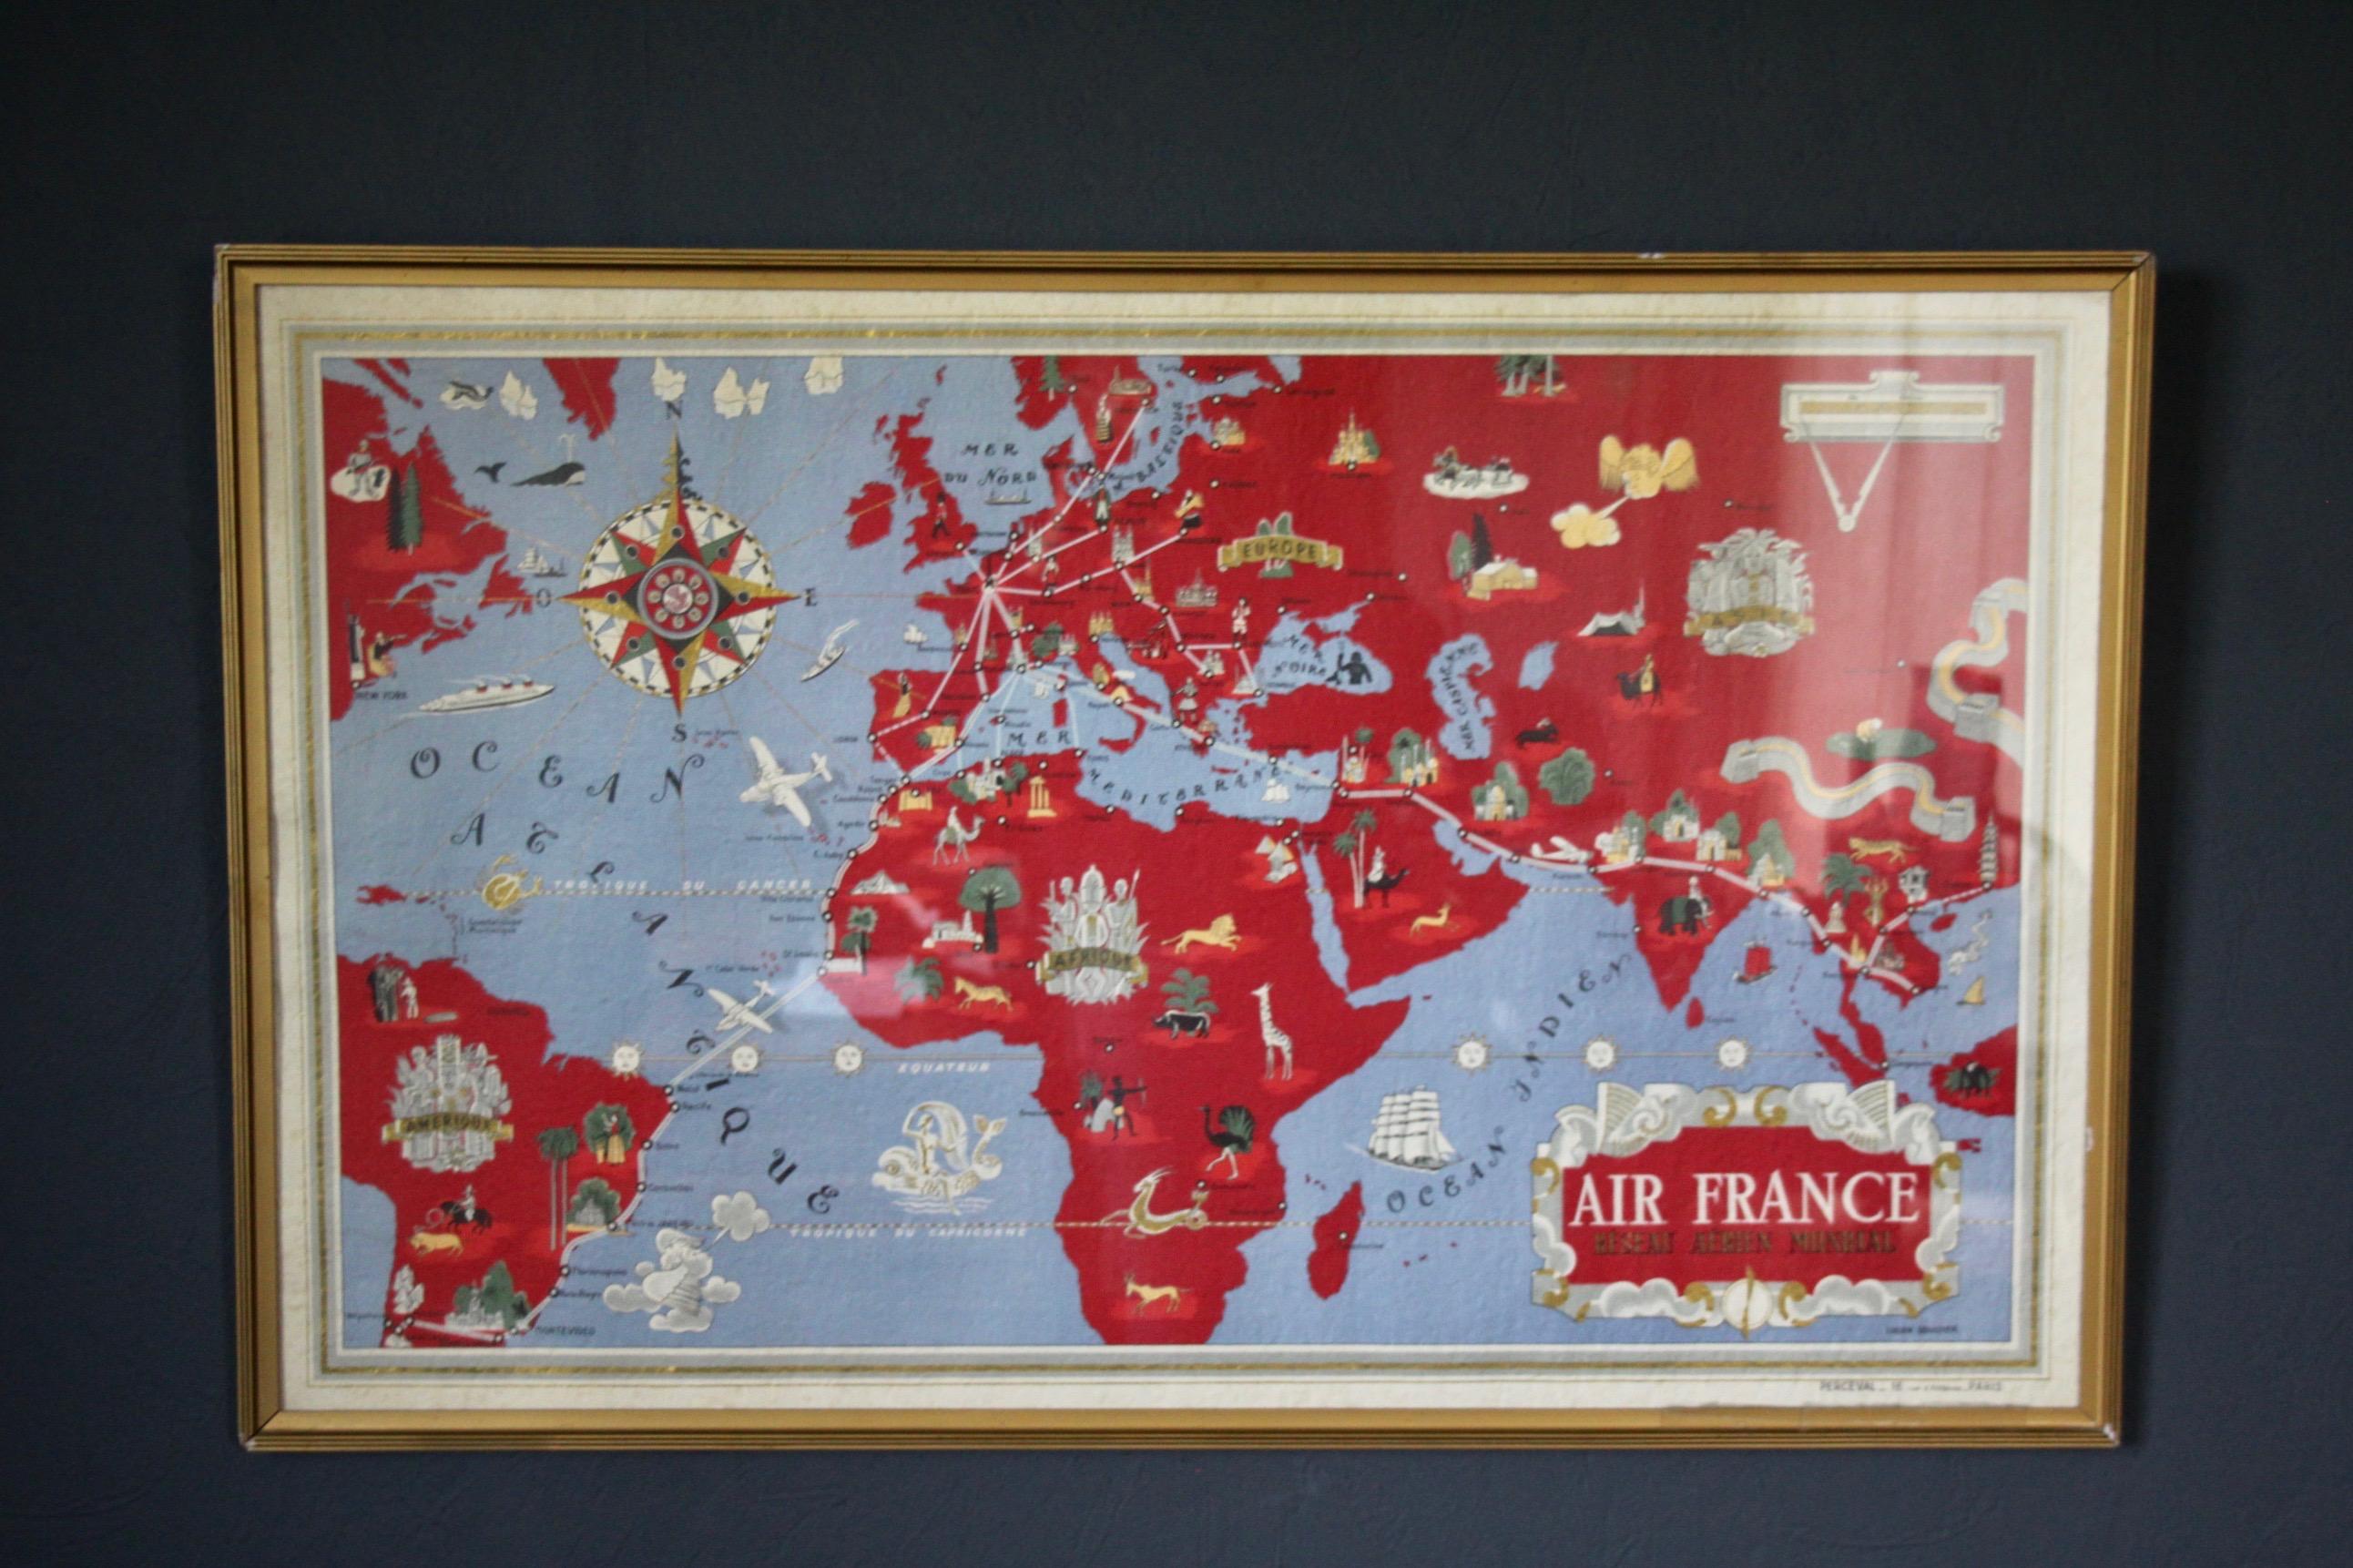 Original Vintage Poster Air France Reseau Aerian Mondial Planisphere World Map signed Lucien Boucher and Perceval